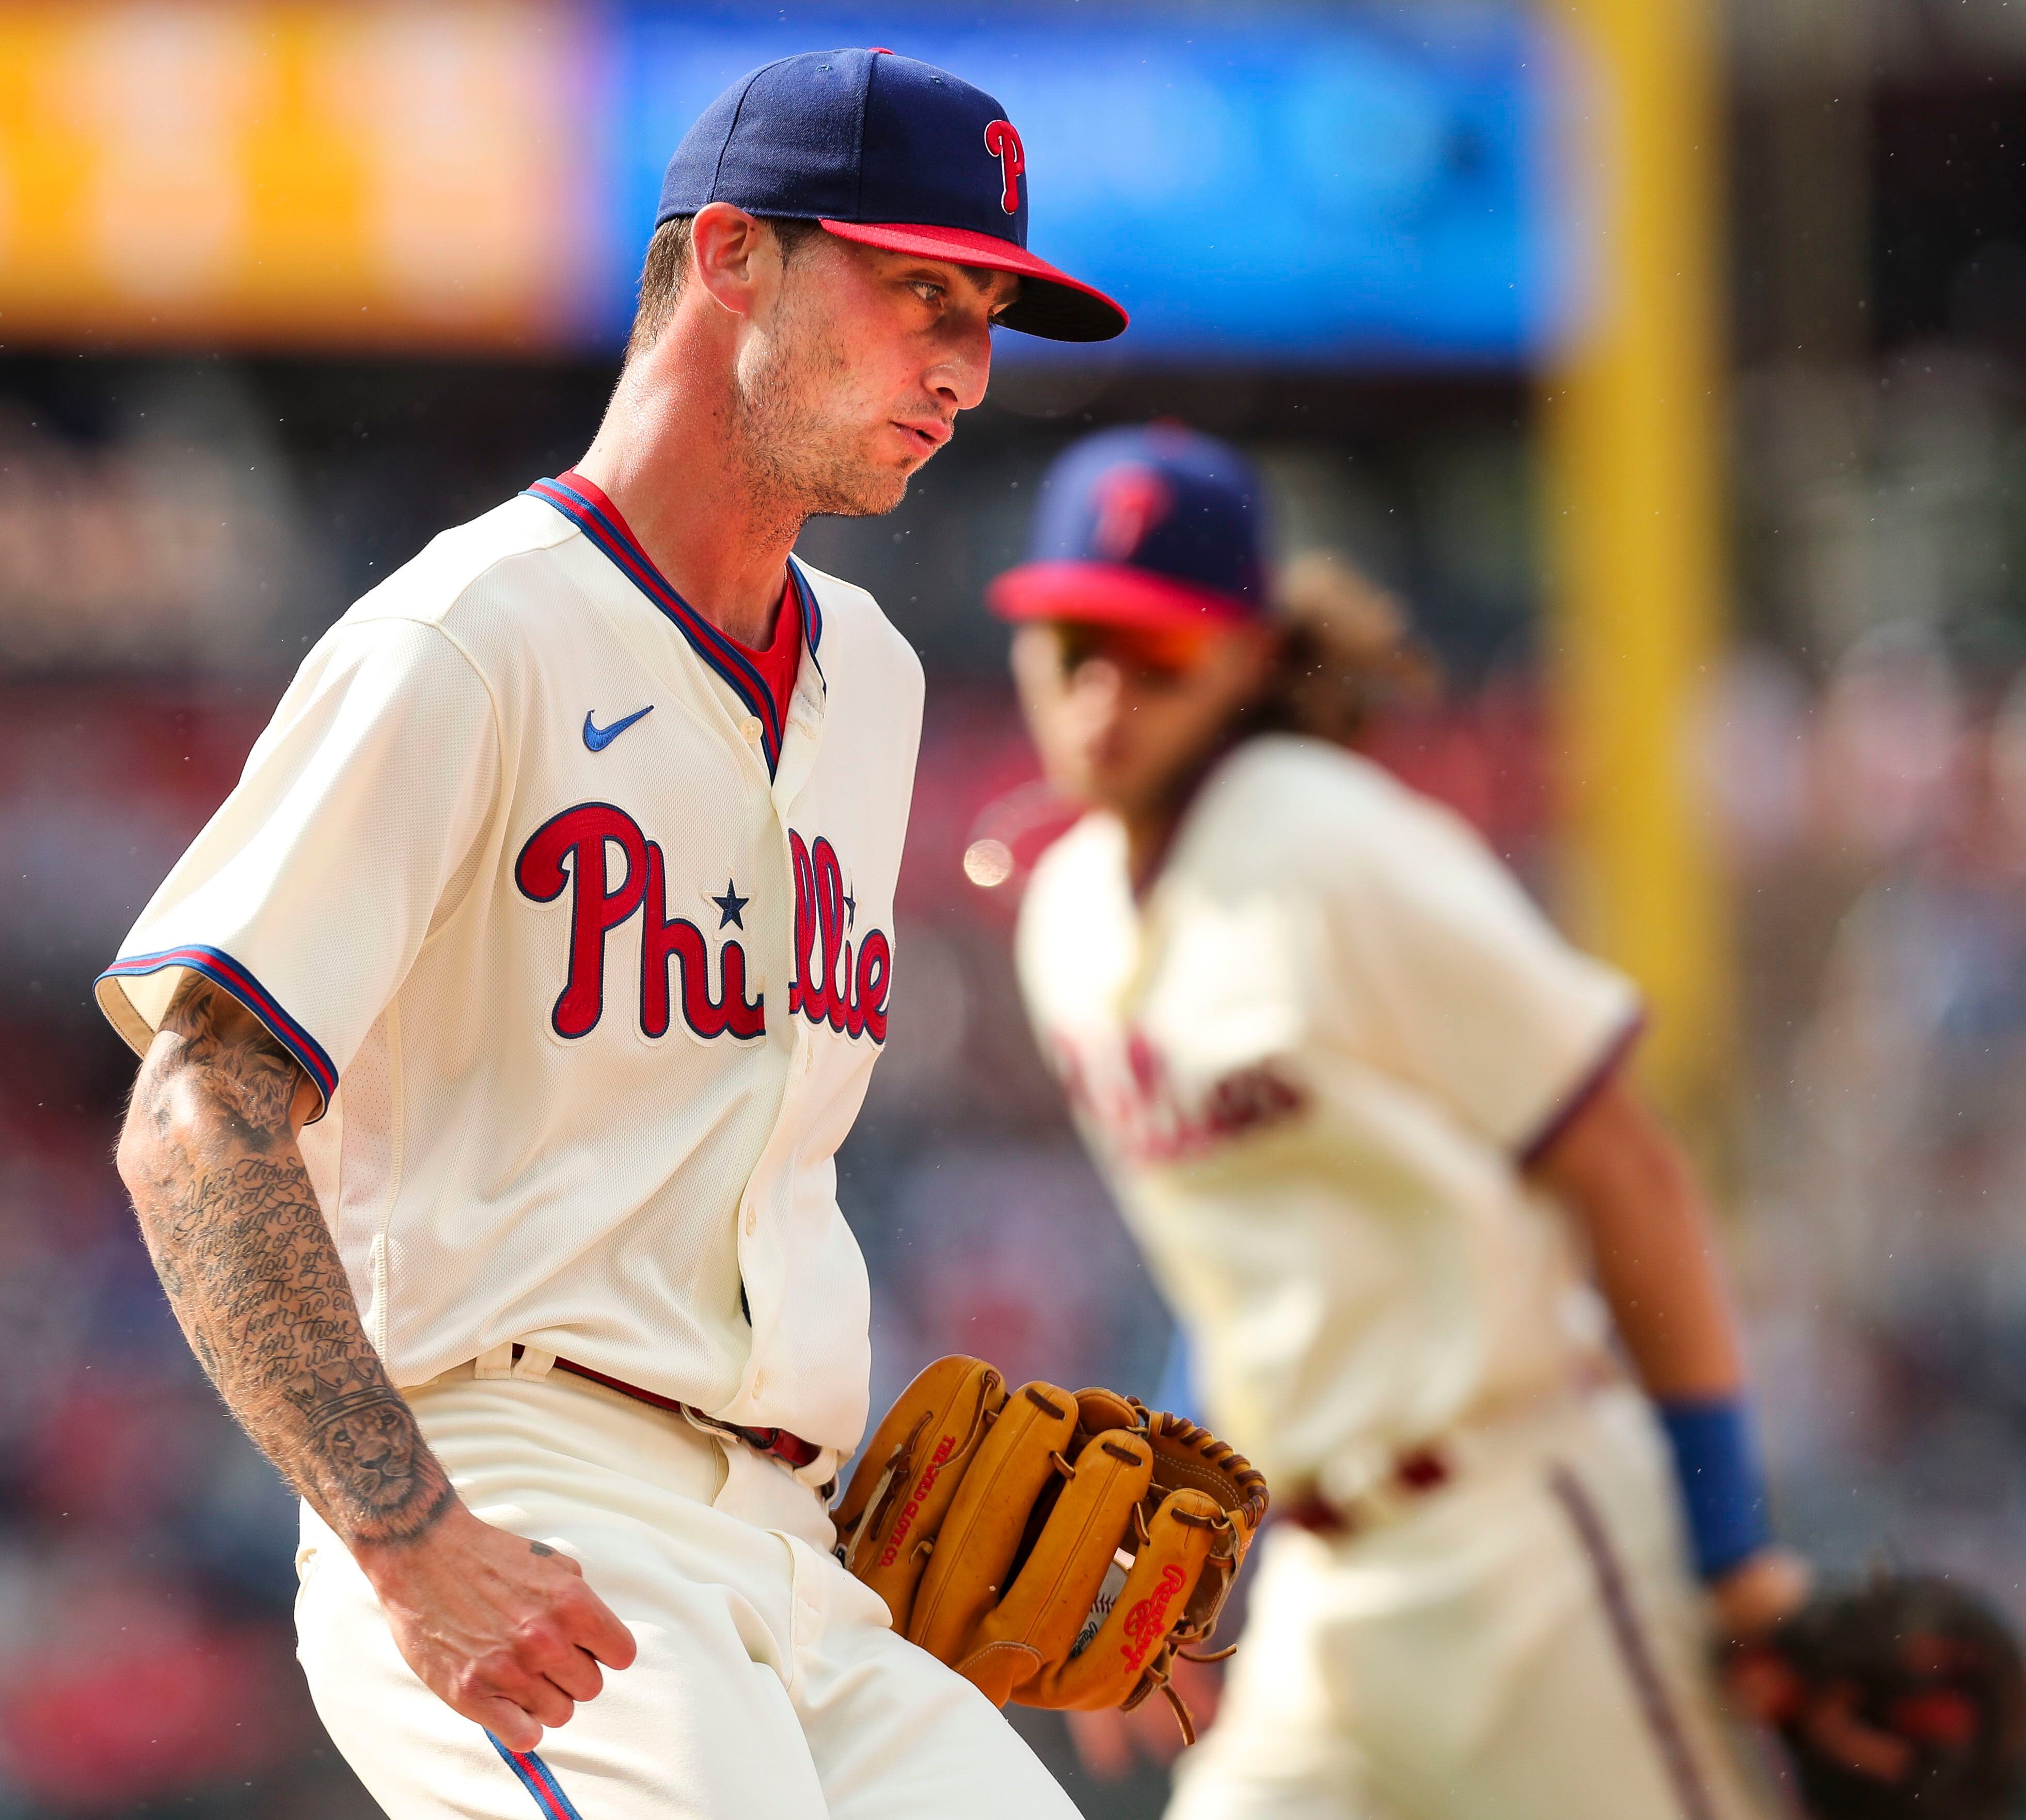 Pirates baffled by Phillies' Arrieta in 7-0 loss